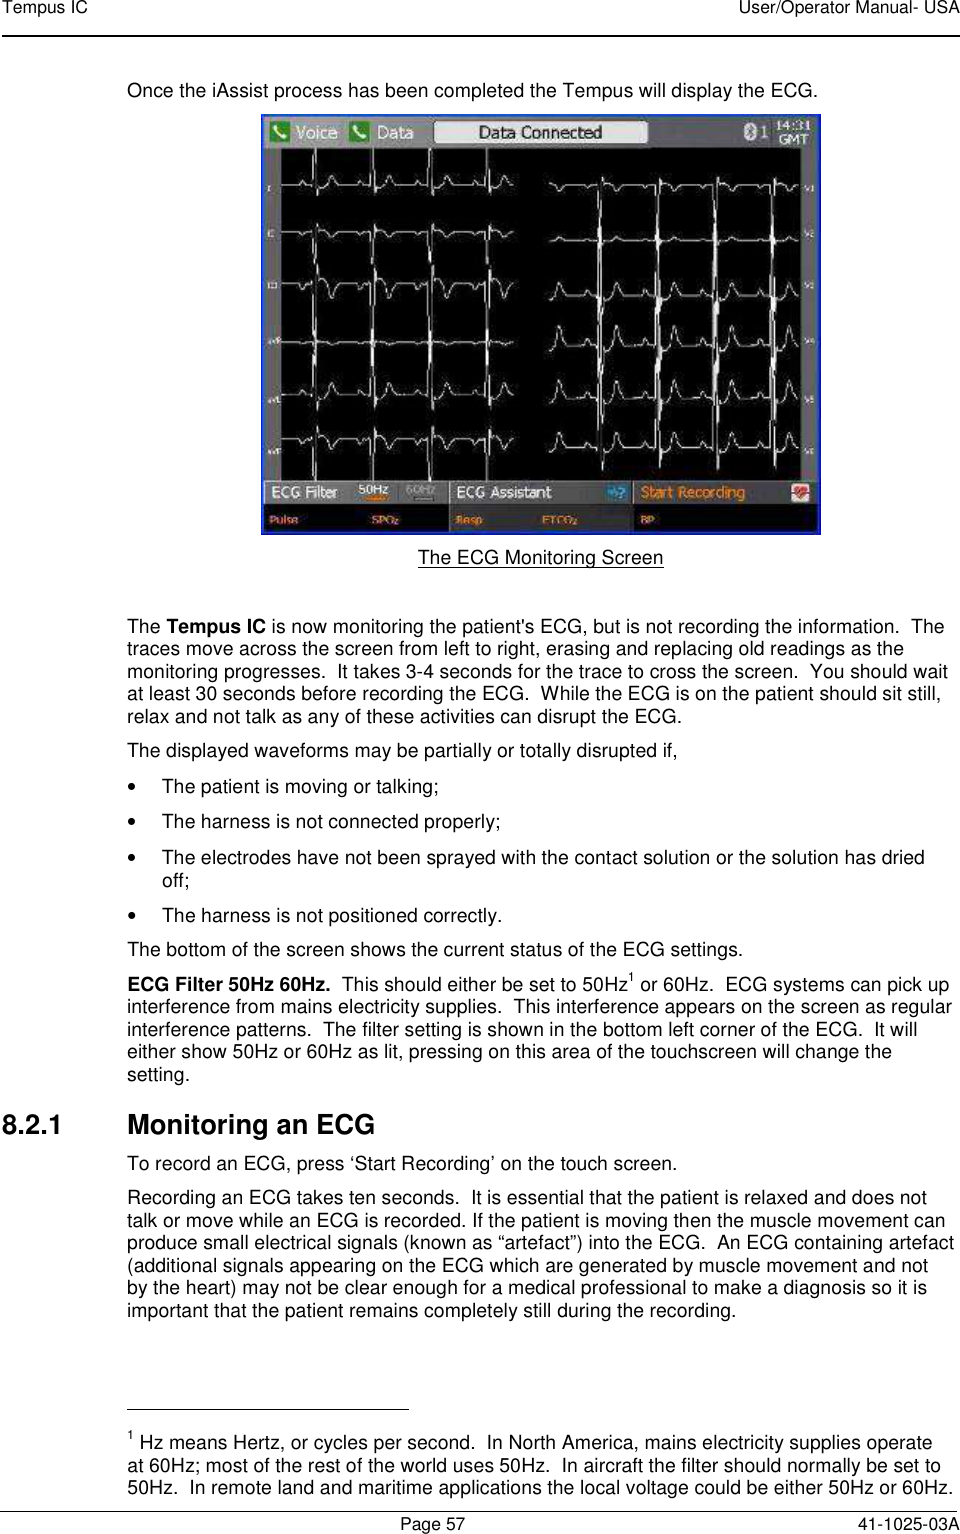 Tempus IC    User/Operator Manual- USA        Page 57  41-1025-03A Once the iAssist process has been completed the Tempus will display the ECG.  The ECG Monitoring Screen  The Tempus IC is now monitoring the patient&apos;s ECG, but is not recording the information.  The traces move across the screen from left to right, erasing and replacing old readings as the monitoring progresses.  It takes 3-4 seconds for the trace to cross the screen.  You should wait at least 30 seconds before recording the ECG.  While the ECG is on the patient should sit still, relax and not talk as any of these activities can disrupt the ECG. The displayed waveforms may be partially or totally disrupted if, •  The patient is moving or talking; •  The harness is not connected properly; •  The electrodes have not been sprayed with the contact solution or the solution has dried off; •  The harness is not positioned correctly. The bottom of the screen shows the current status of the ECG settings.   ECG Filter 50Hz 60Hz.  This should either be set to 50Hz1 or 60Hz.  ECG systems can pick up interference from mains electricity supplies.  This interference appears on the screen as regular interference patterns.  The filter setting is shown in the bottom left corner of the ECG.  It will either show 50Hz or 60Hz as lit, pressing on this area of the touchscreen will change the setting. 8.2.1  Monitoring an ECG To record an ECG, press ‘Start Recording’ on the touch screen.   Recording an ECG takes ten seconds.  It is essential that the patient is relaxed and does not talk or move while an ECG is recorded. If the patient is moving then the muscle movement can produce small electrical signals (known as “artefact”) into the ECG.  An ECG containing artefact (additional signals appearing on the ECG which are generated by muscle movement and not by the heart) may not be clear enough for a medical professional to make a diagnosis so it is important that the patient remains completely still during the recording.                                             1 Hz means Hertz, or cycles per second.  In North America, mains electricity supplies operate at 60Hz; most of the rest of the world uses 50Hz.  In aircraft the filter should normally be set to 50Hz.  In remote land and maritime applications the local voltage could be either 50Hz or 60Hz.   